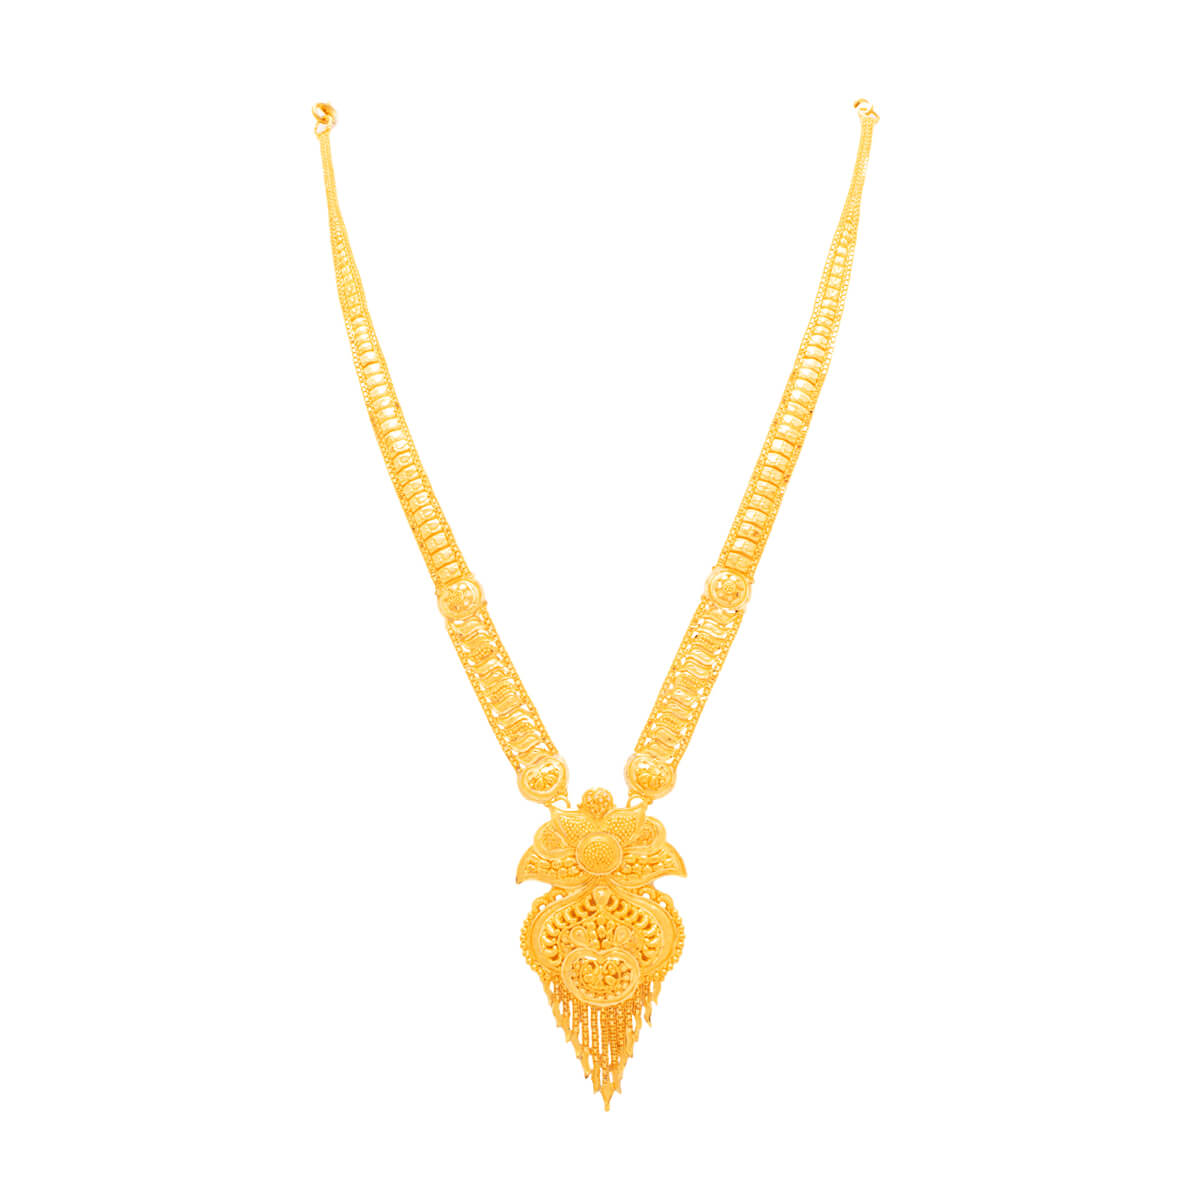 FIND UNIQUE DESIGNS OF LONG NECKLACE ONLINE - WHP Jewellers